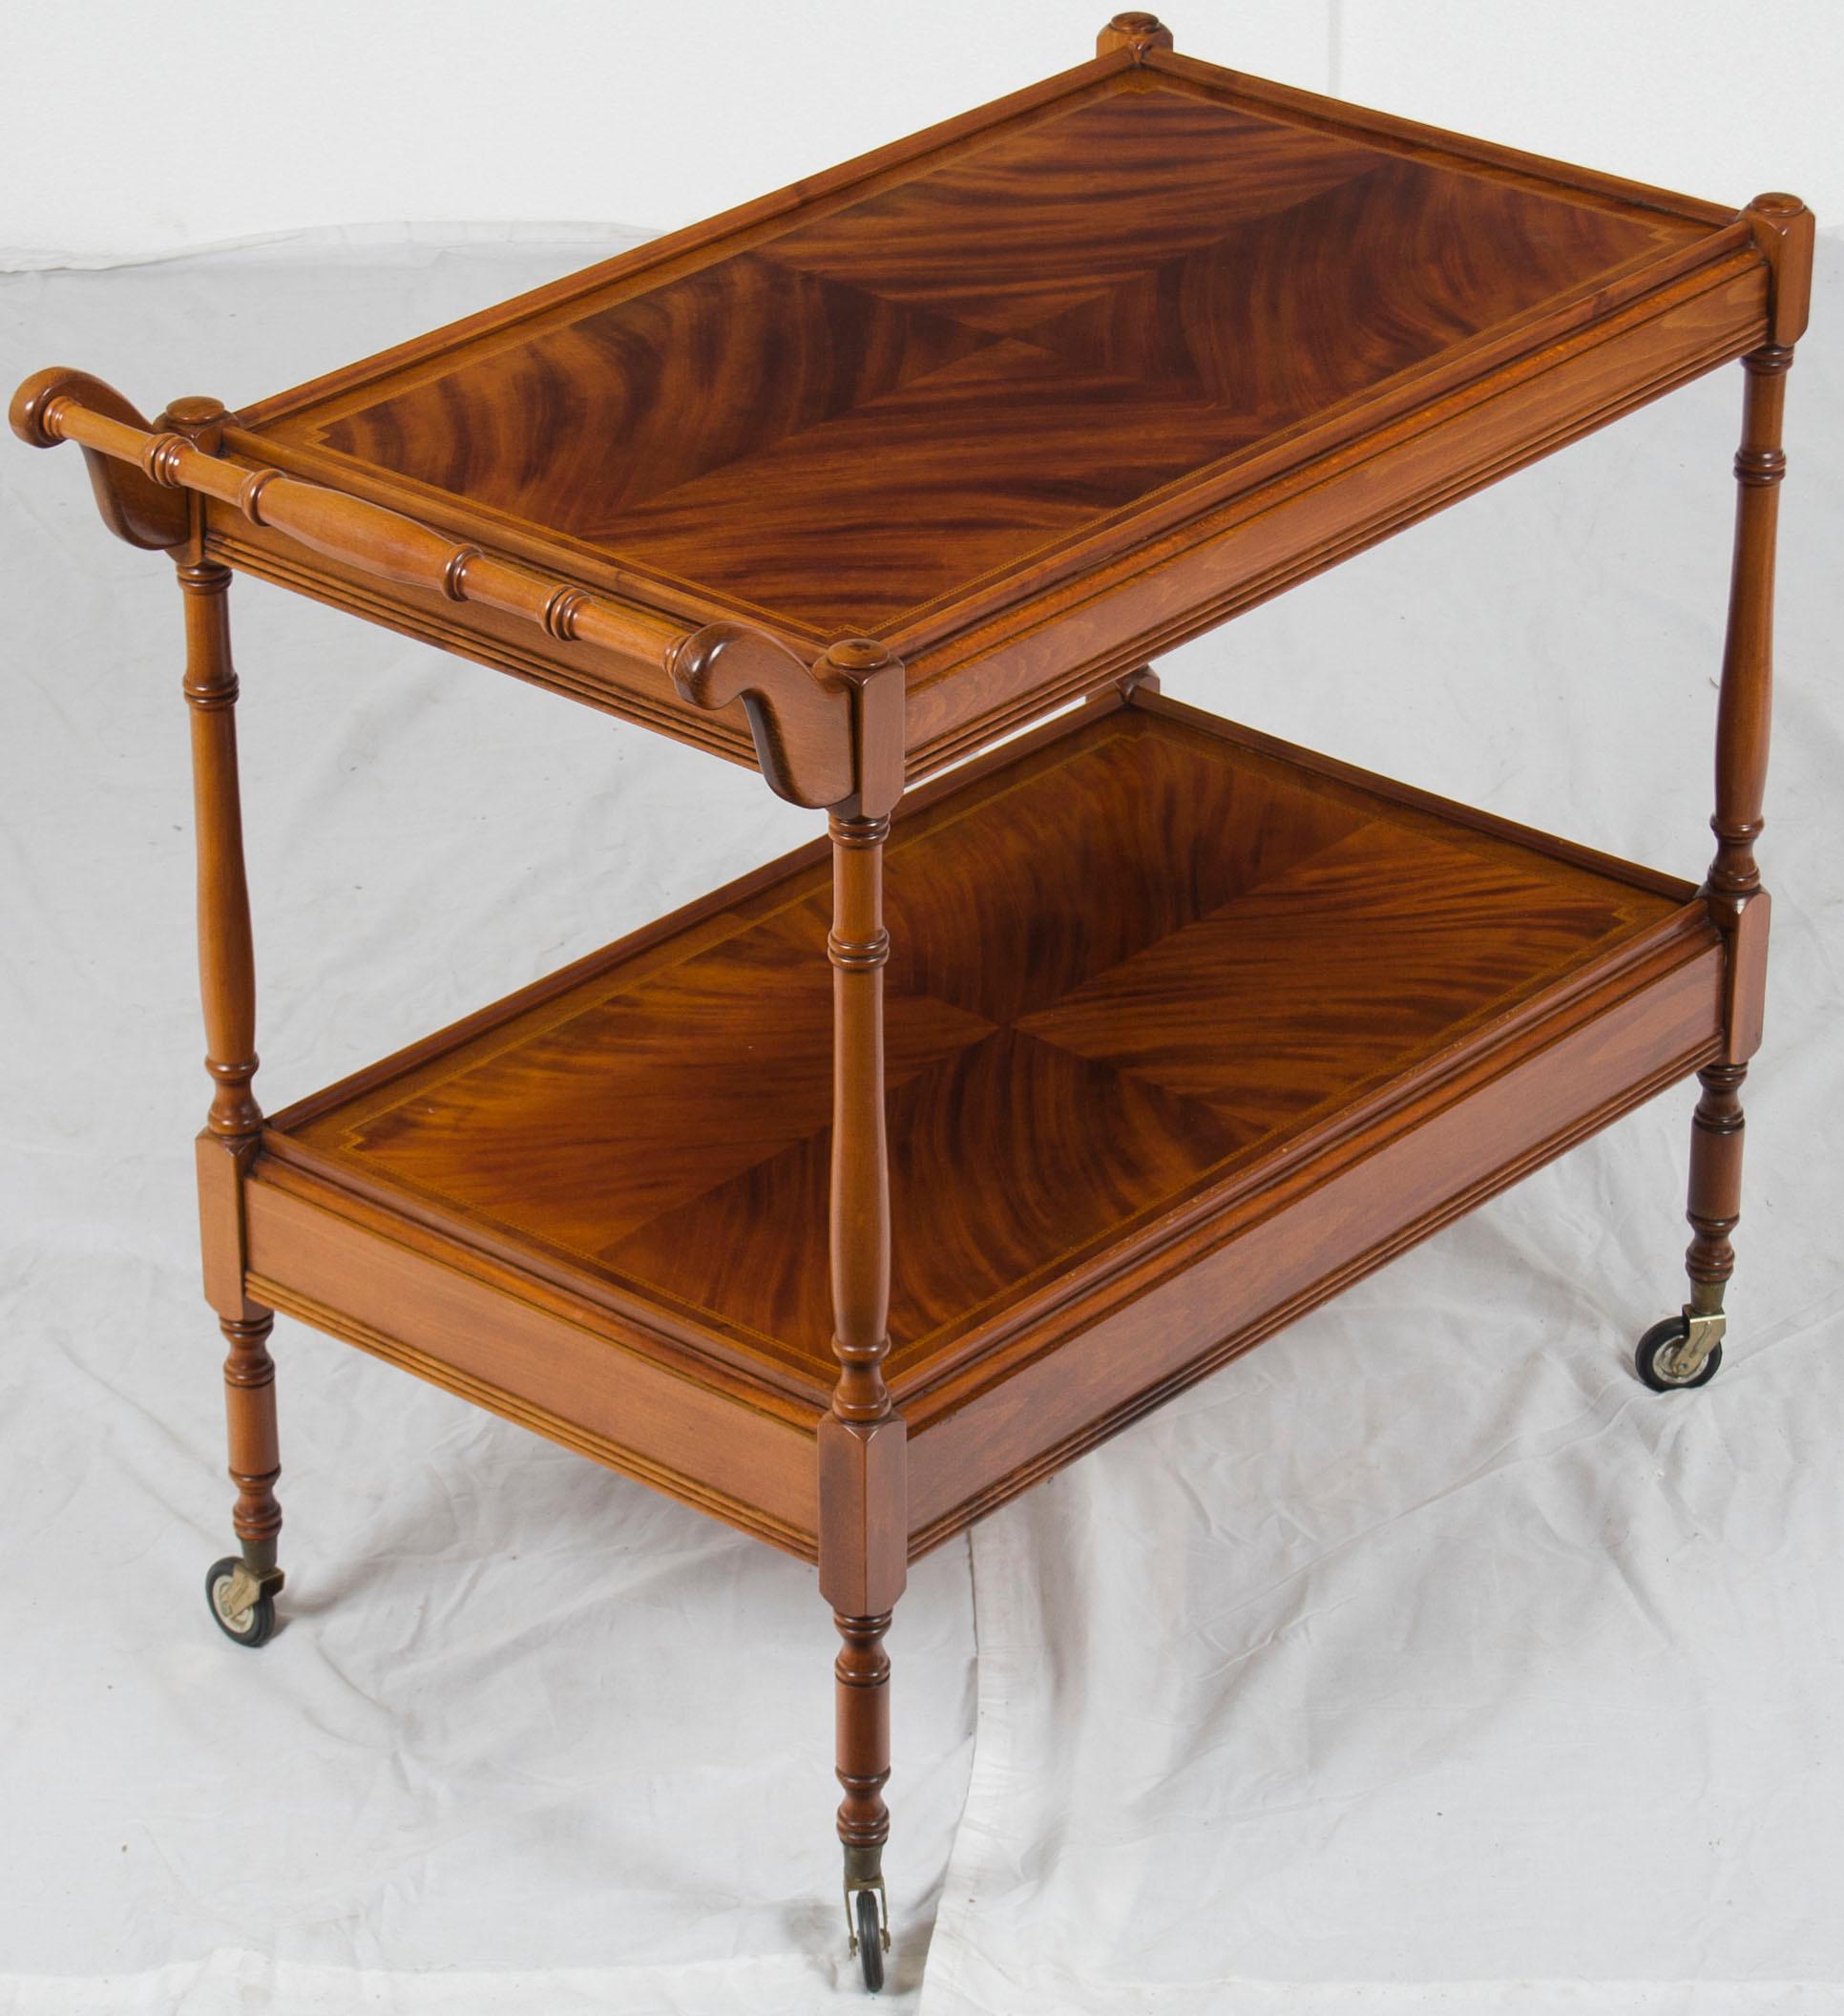 English Flame Mahogany Two-Tier Serving Trolley Tea Bar Cart with Drawer